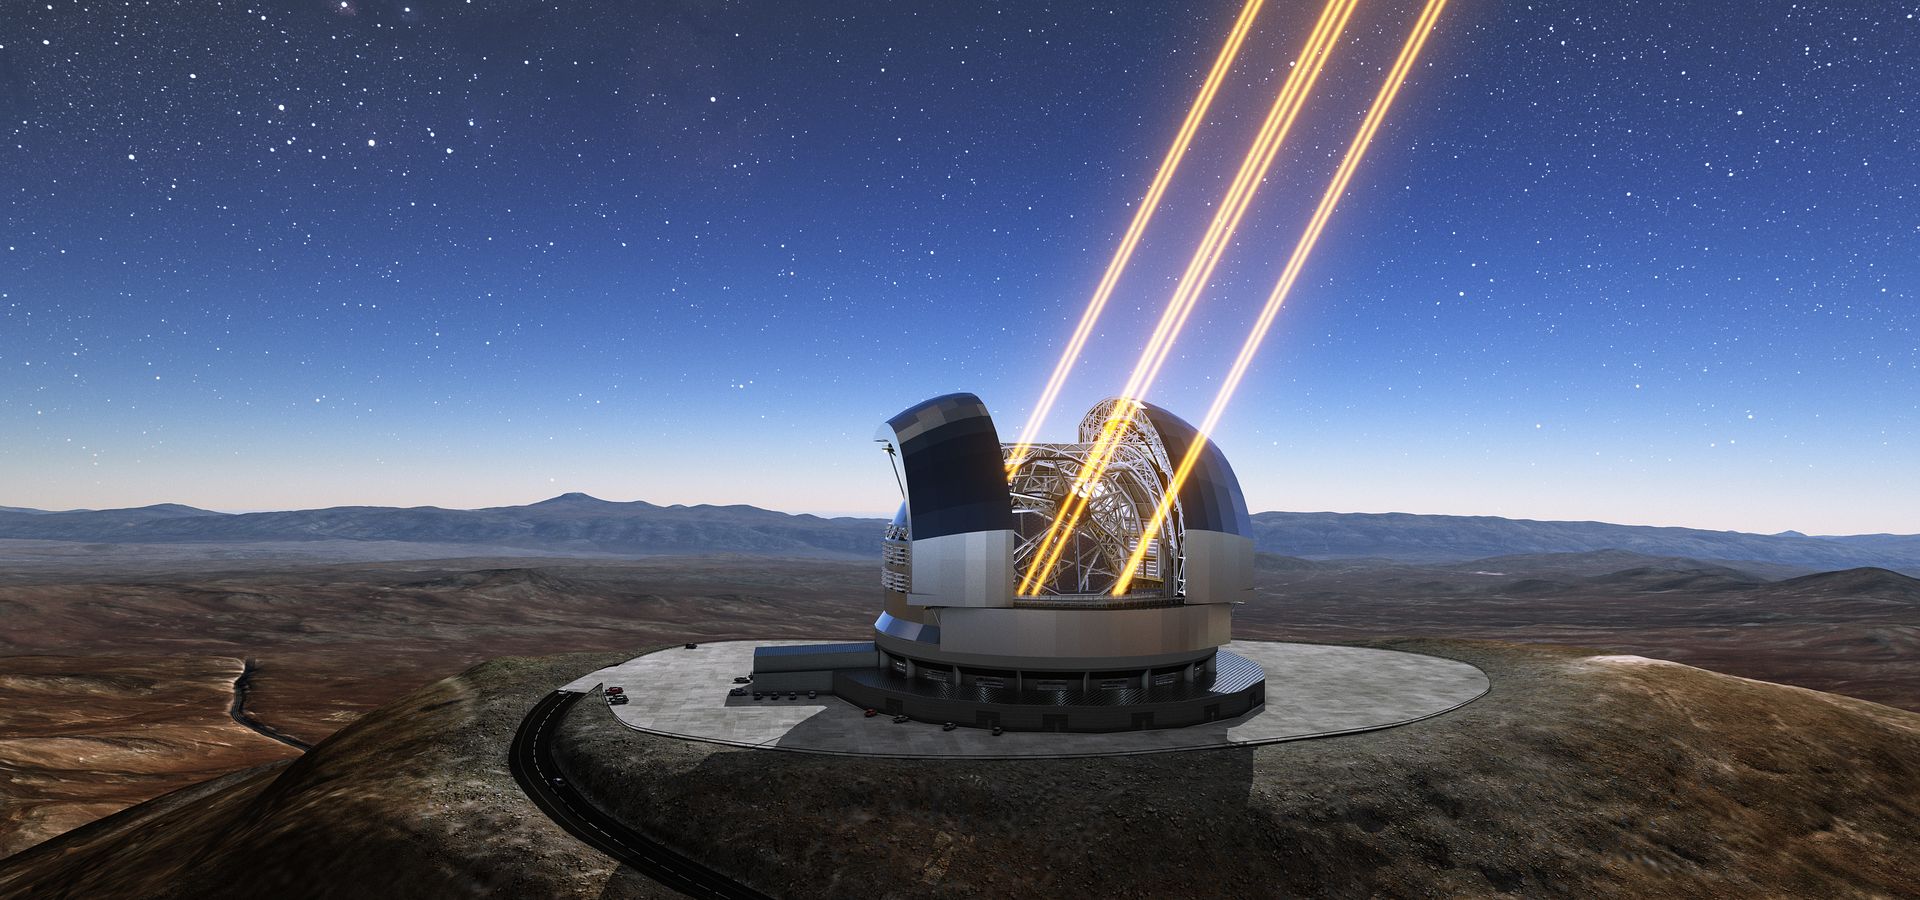 The Extremely large telescope in Chile  null